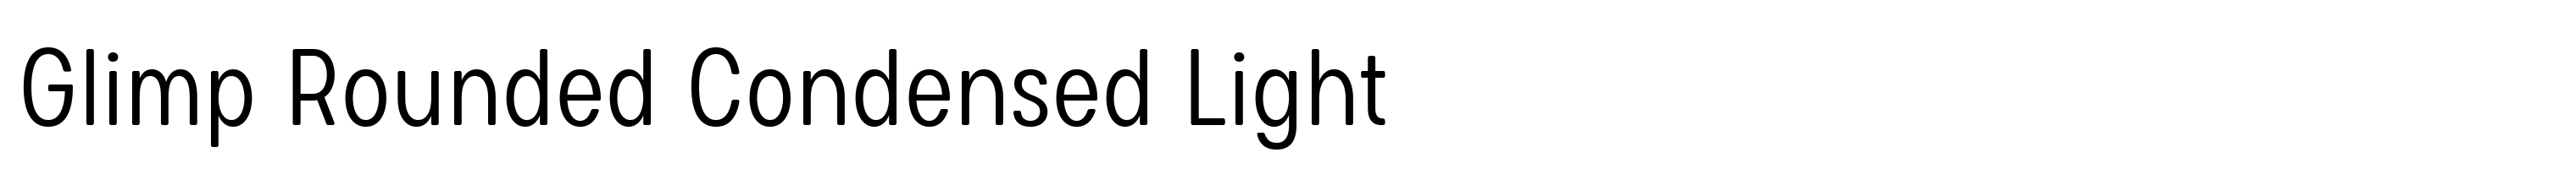 Glimp Rounded Condensed Light